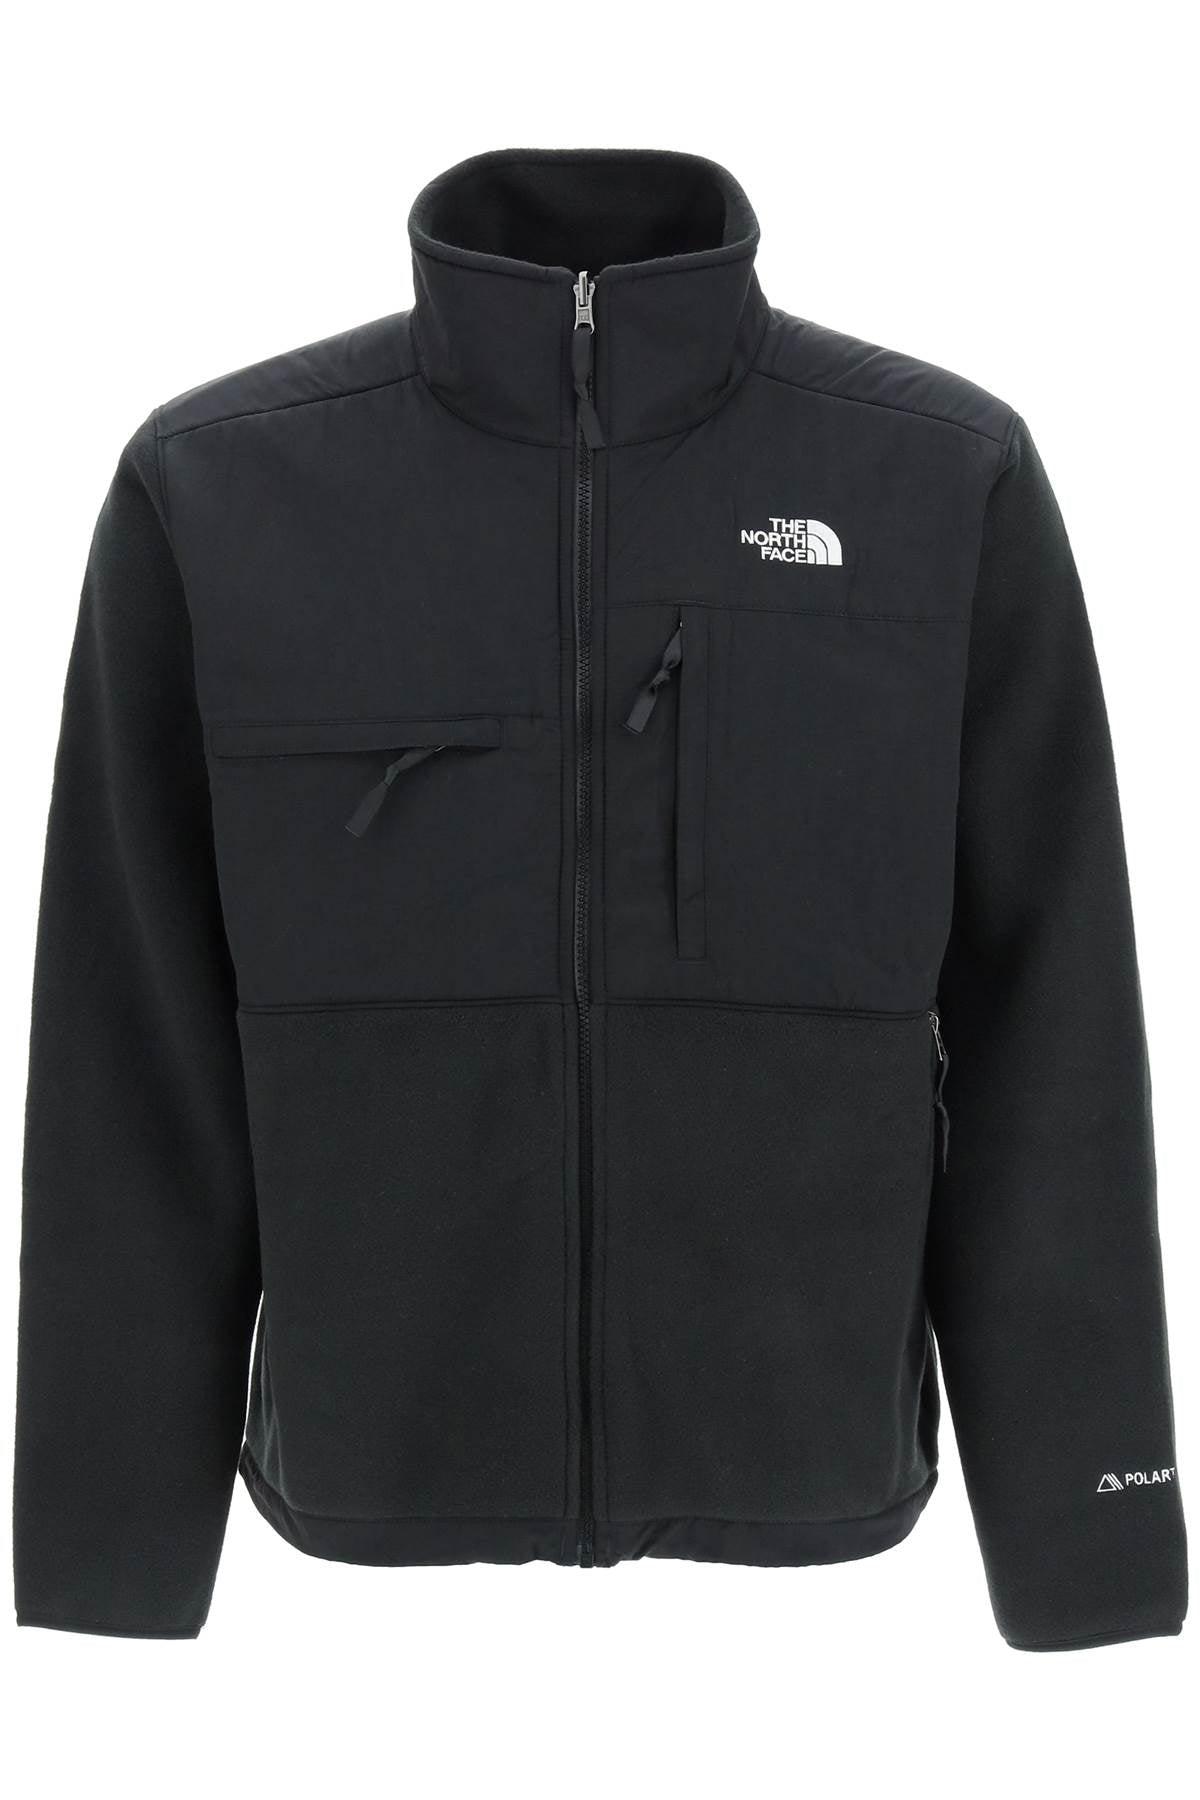 The North Face 'denali' Fleece And Nylon Jacket in Black for Men | Lyst